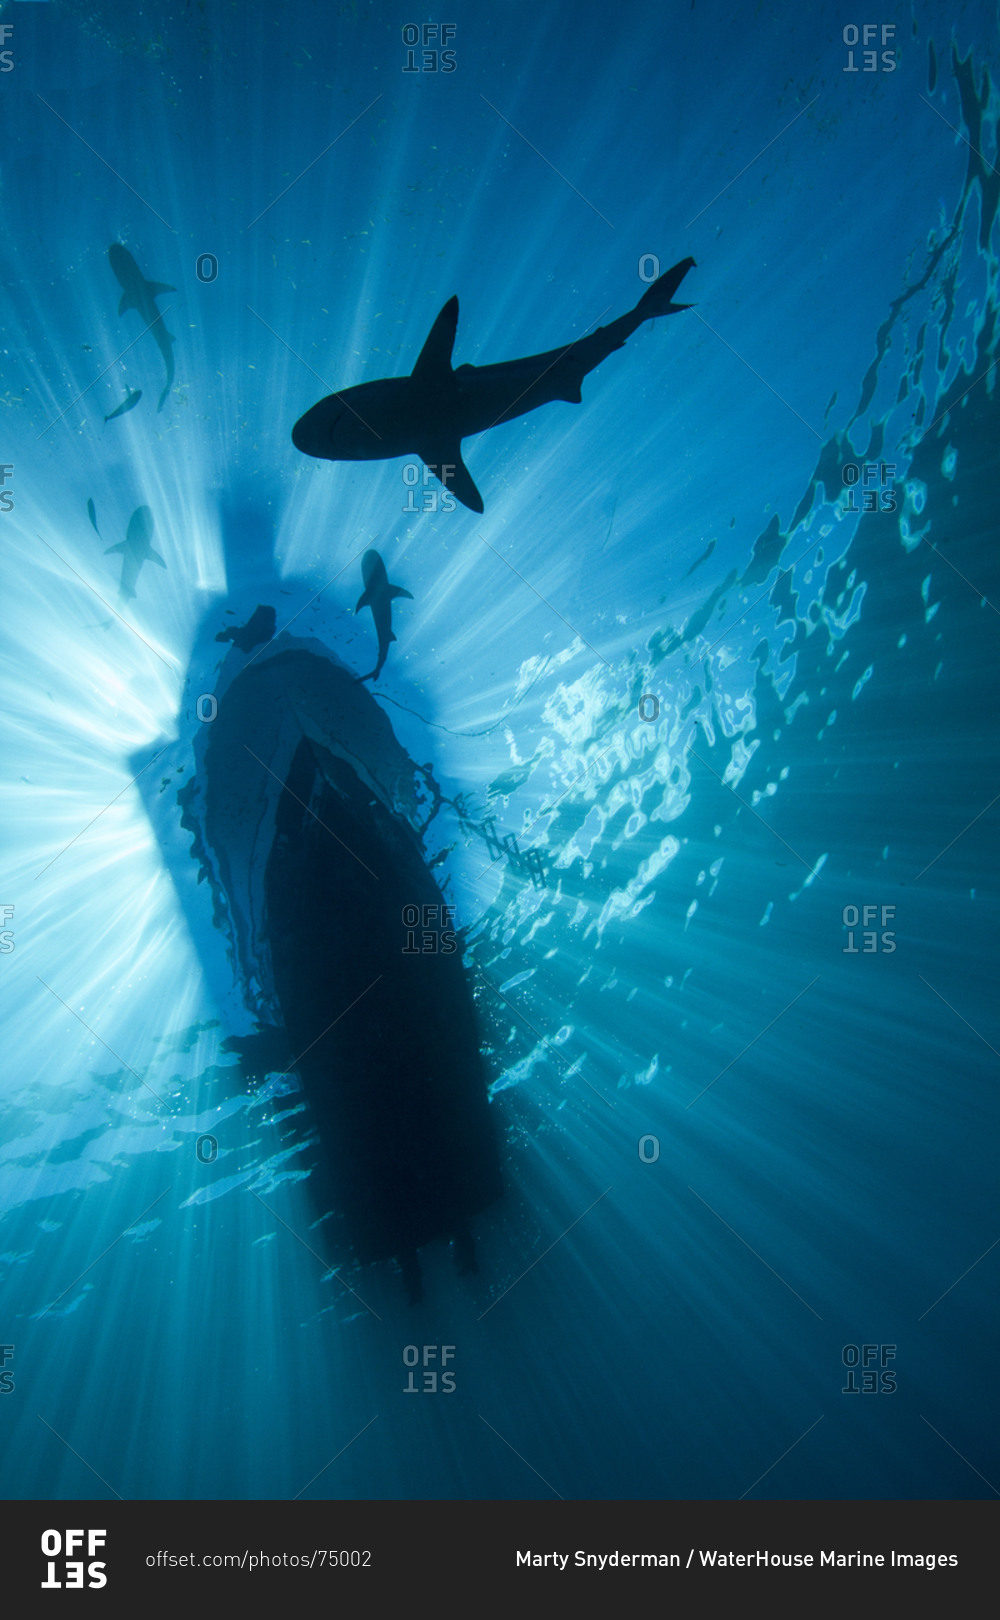 Outline of a sharks surrounding a boat, silhouetted against the ocean's surface and illuminated by sunbeams